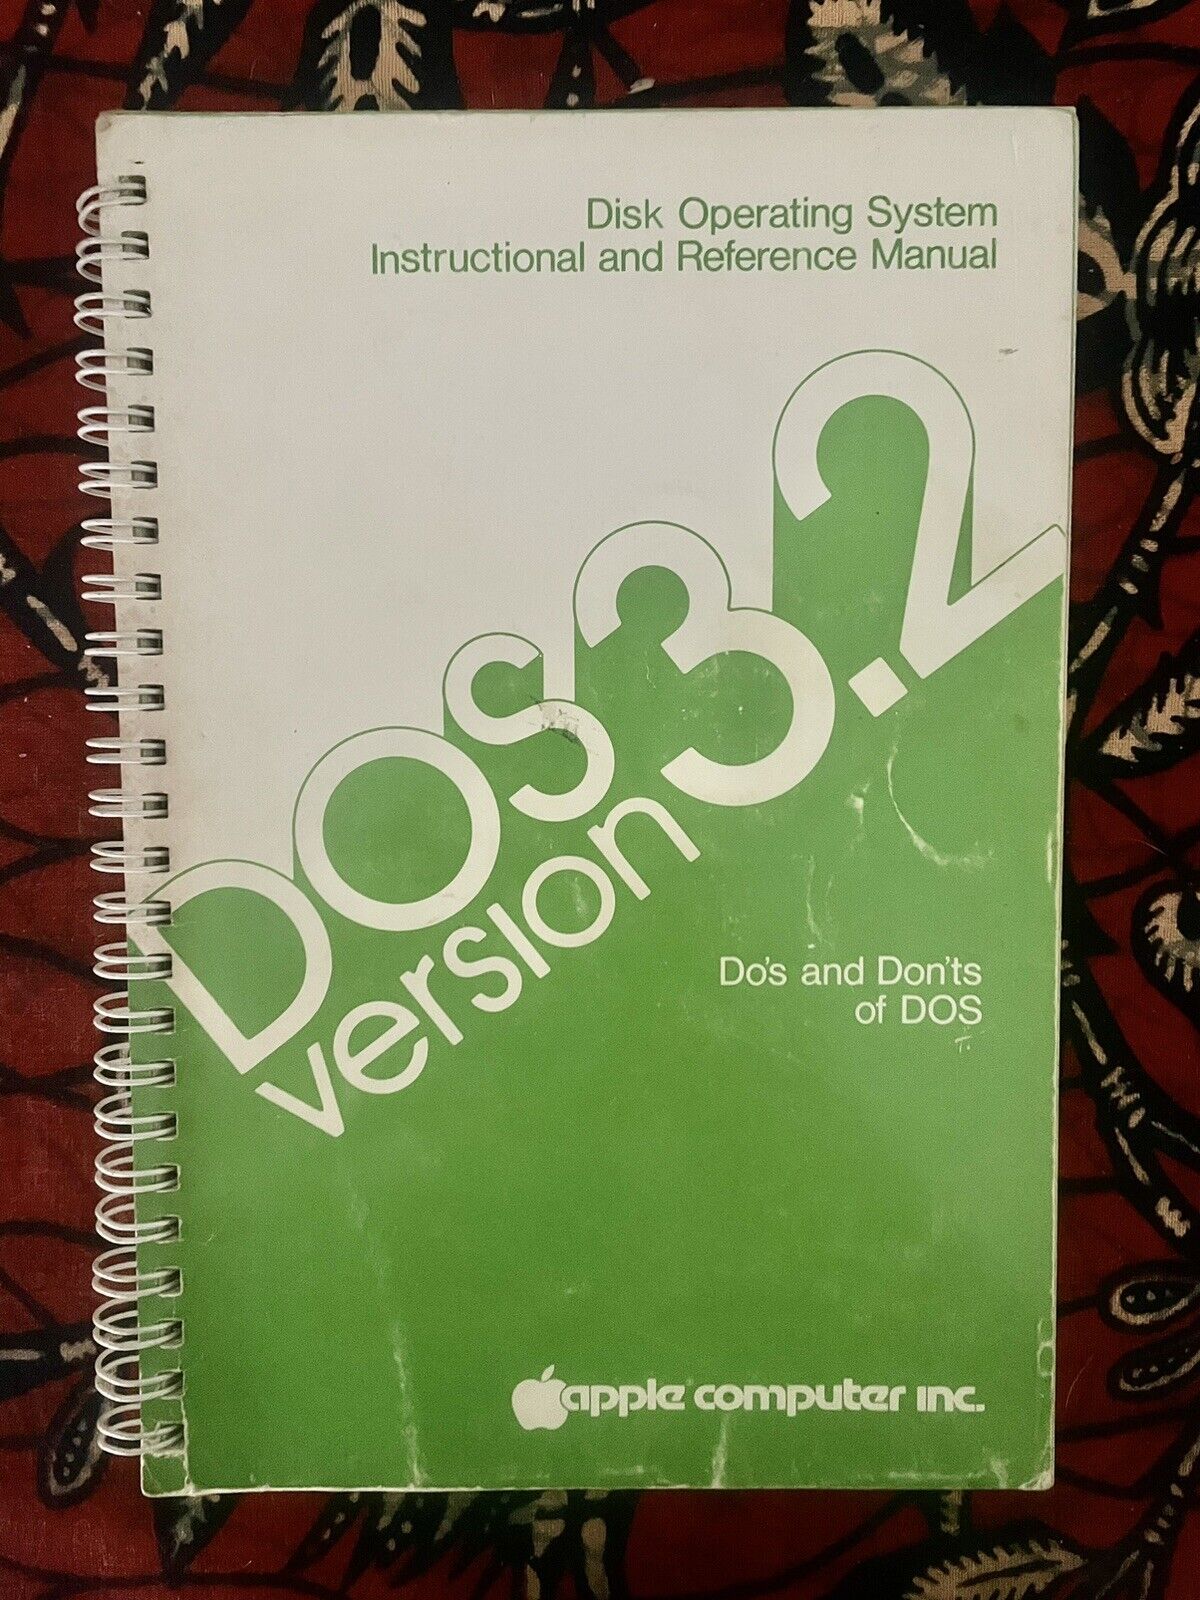 Apple Computer Inc. DOS 3.2 Version. Do’s Don’ts Manual Reference Card Included